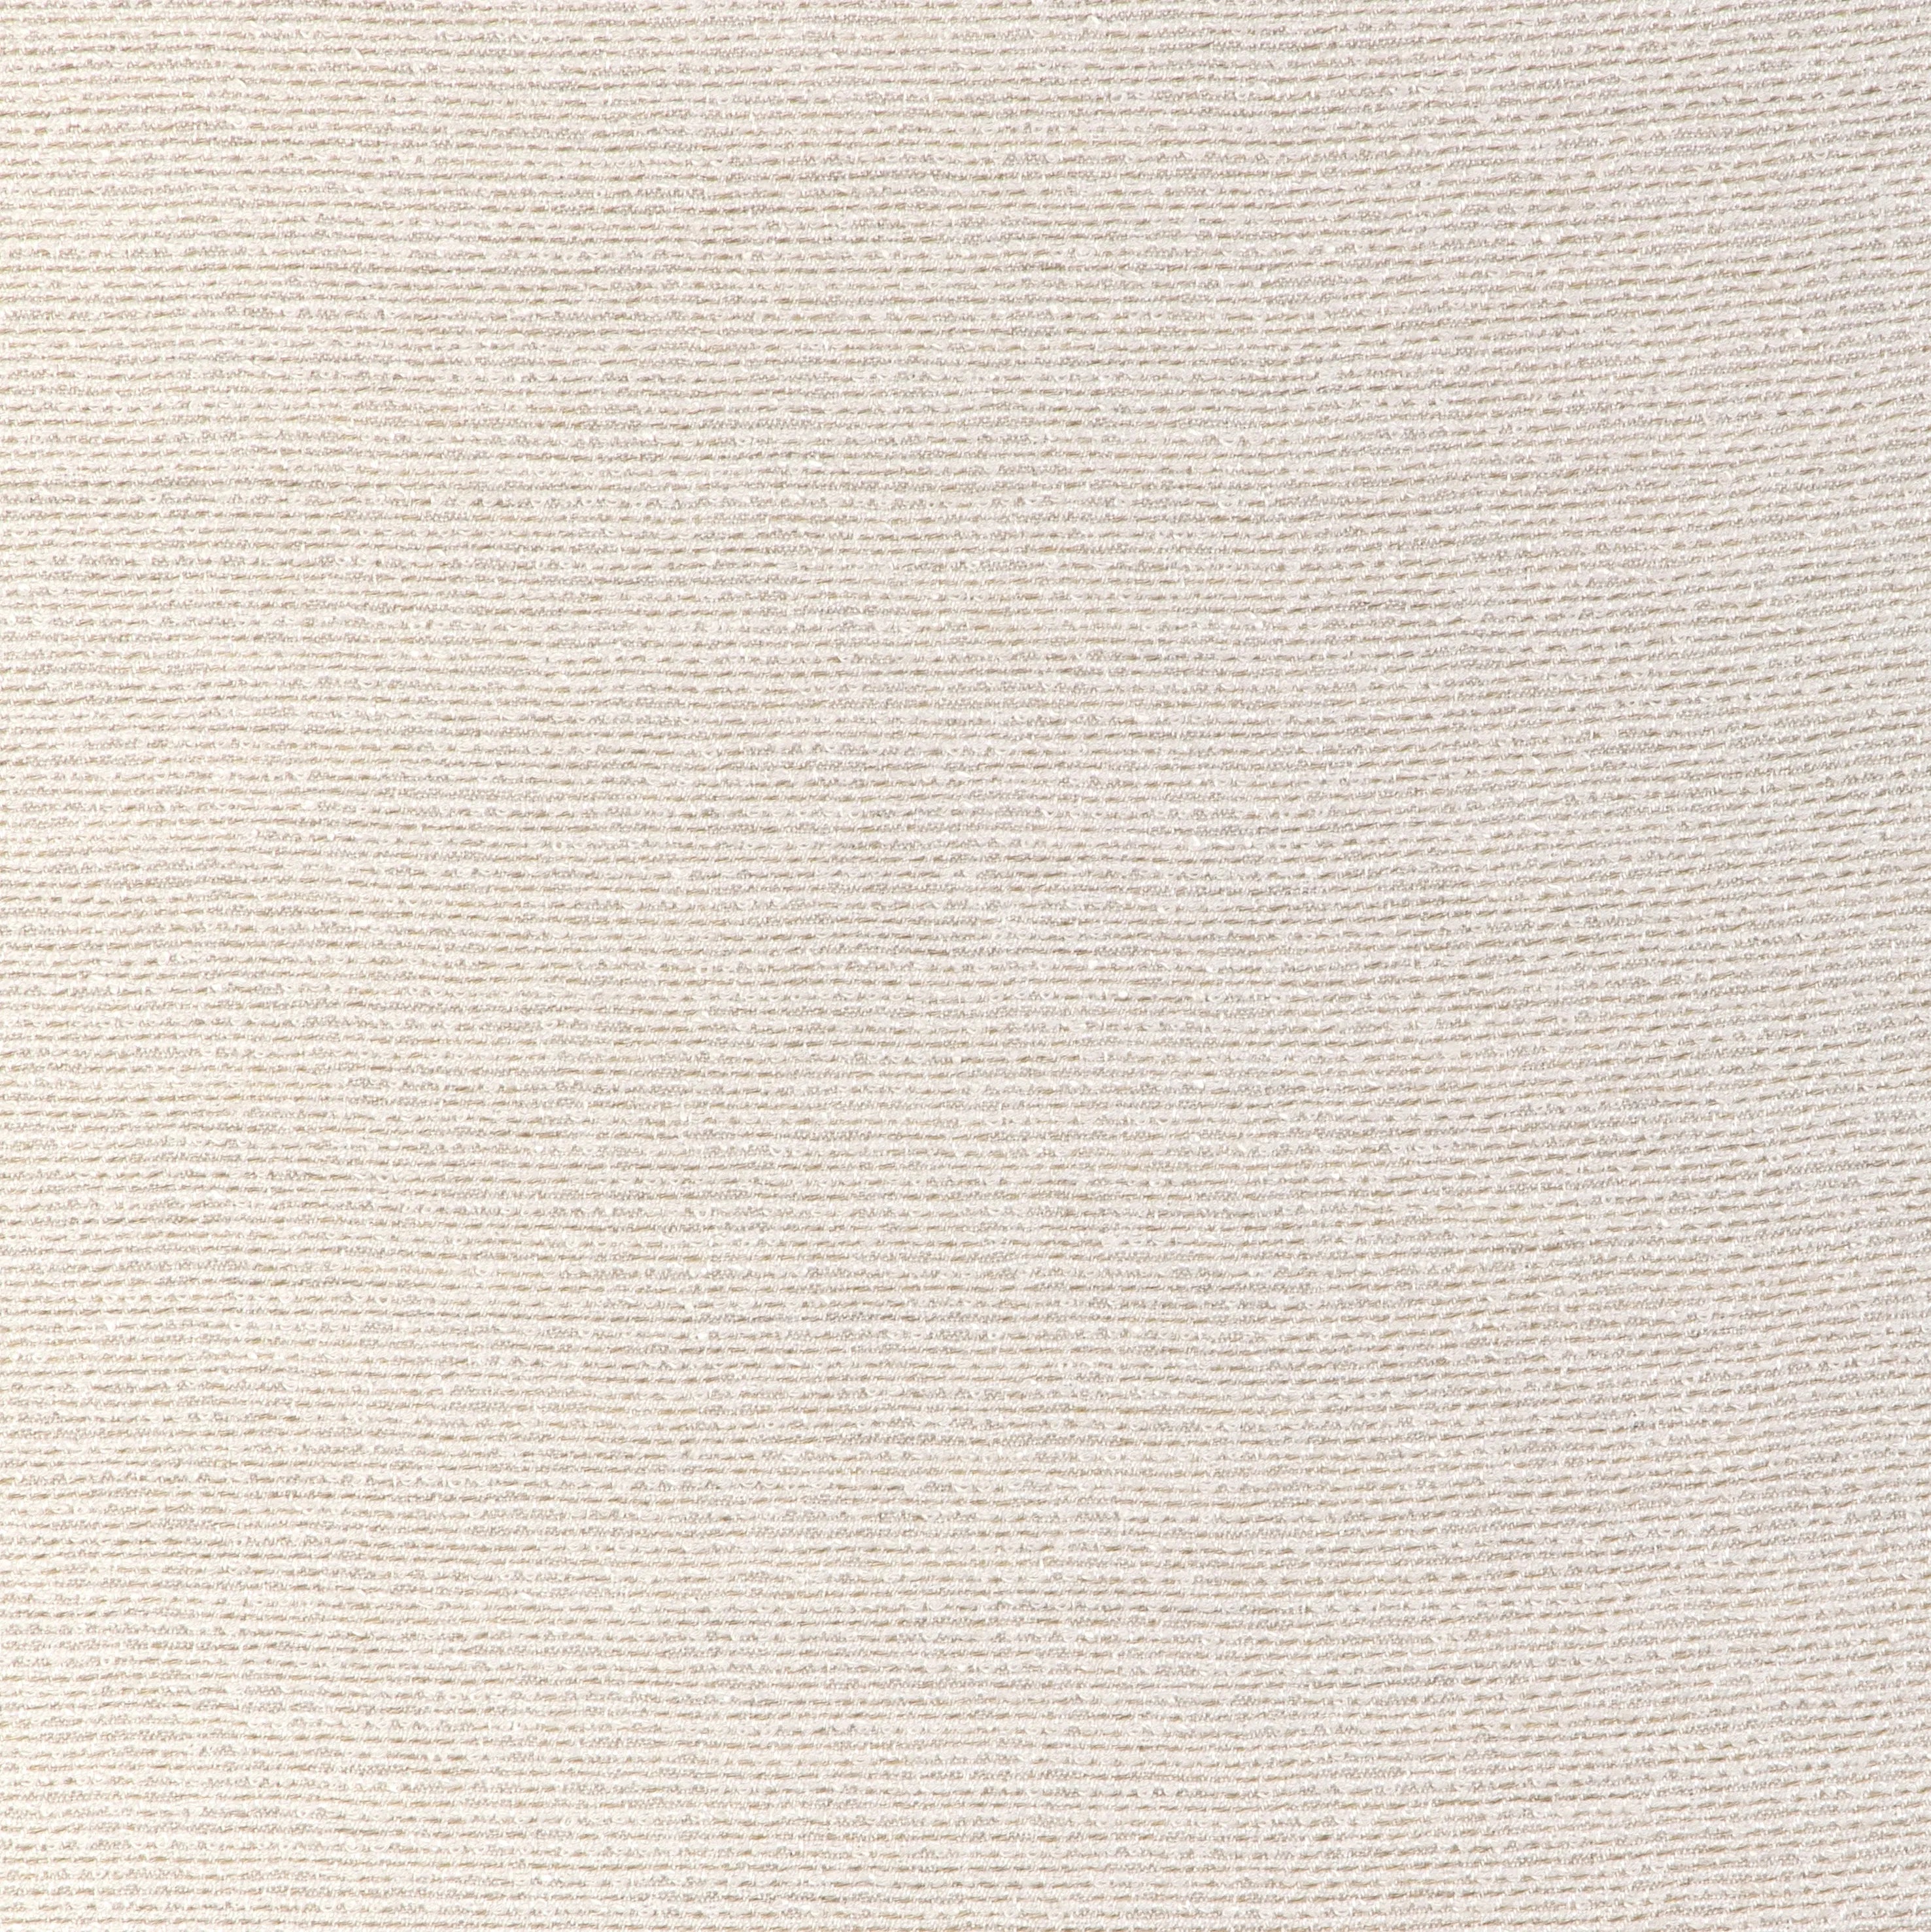 Chatham Texture fabric in sand color - pattern 36935.116.0 - by Kravet Couture in the Riviera collection